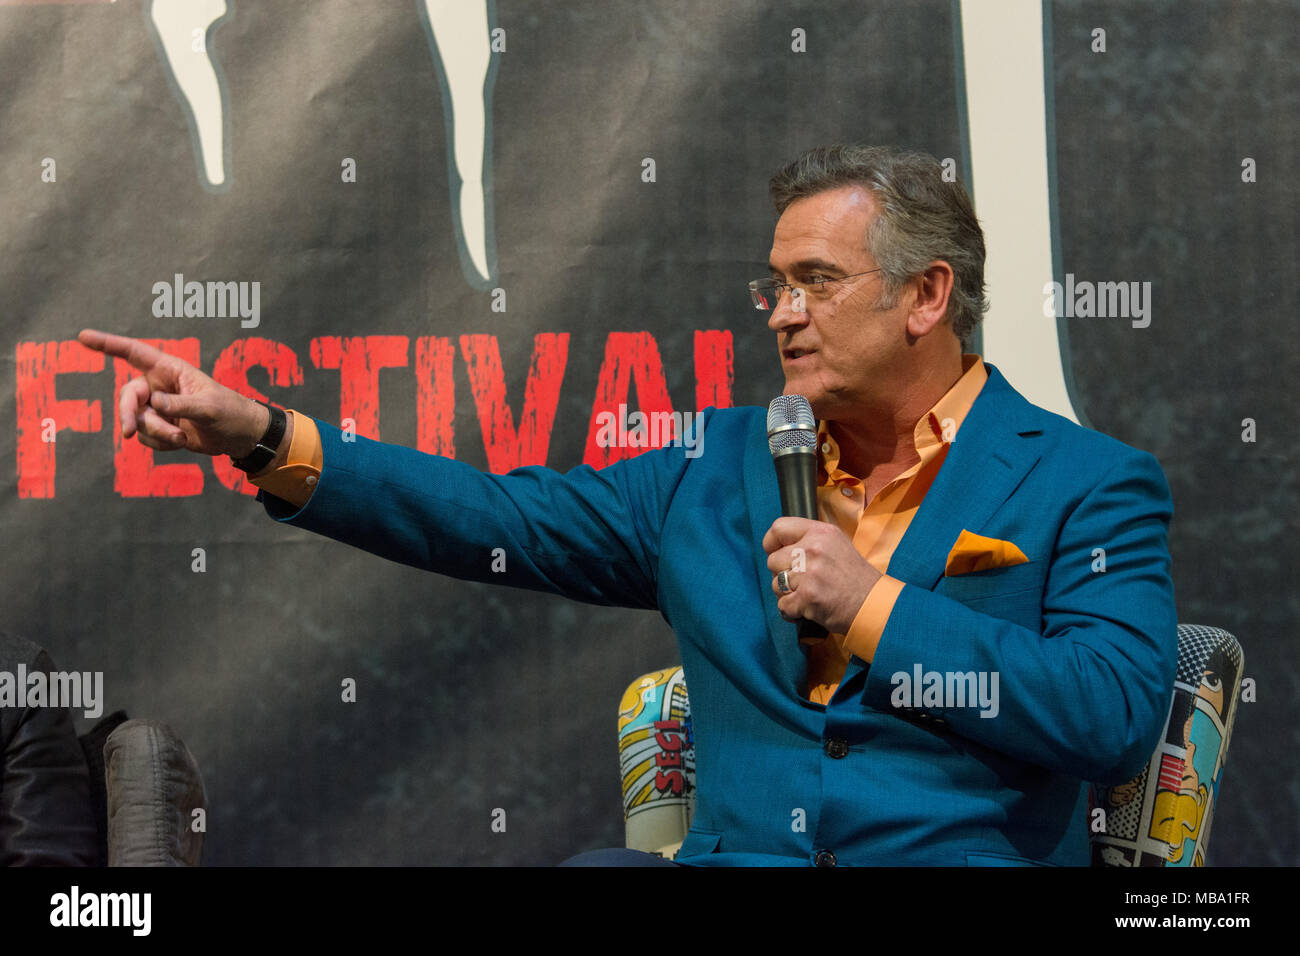 DORTMUND, GERMANY - APRIL 8: Actor Bruce Campbell (Ash vs Evil Dead, Evil Dead) at Weekend of Hell, a two day (April 7-8 2018) horror-themed fan convention. Credit: Markus Wissmann/Alamy Live News Stock Photo